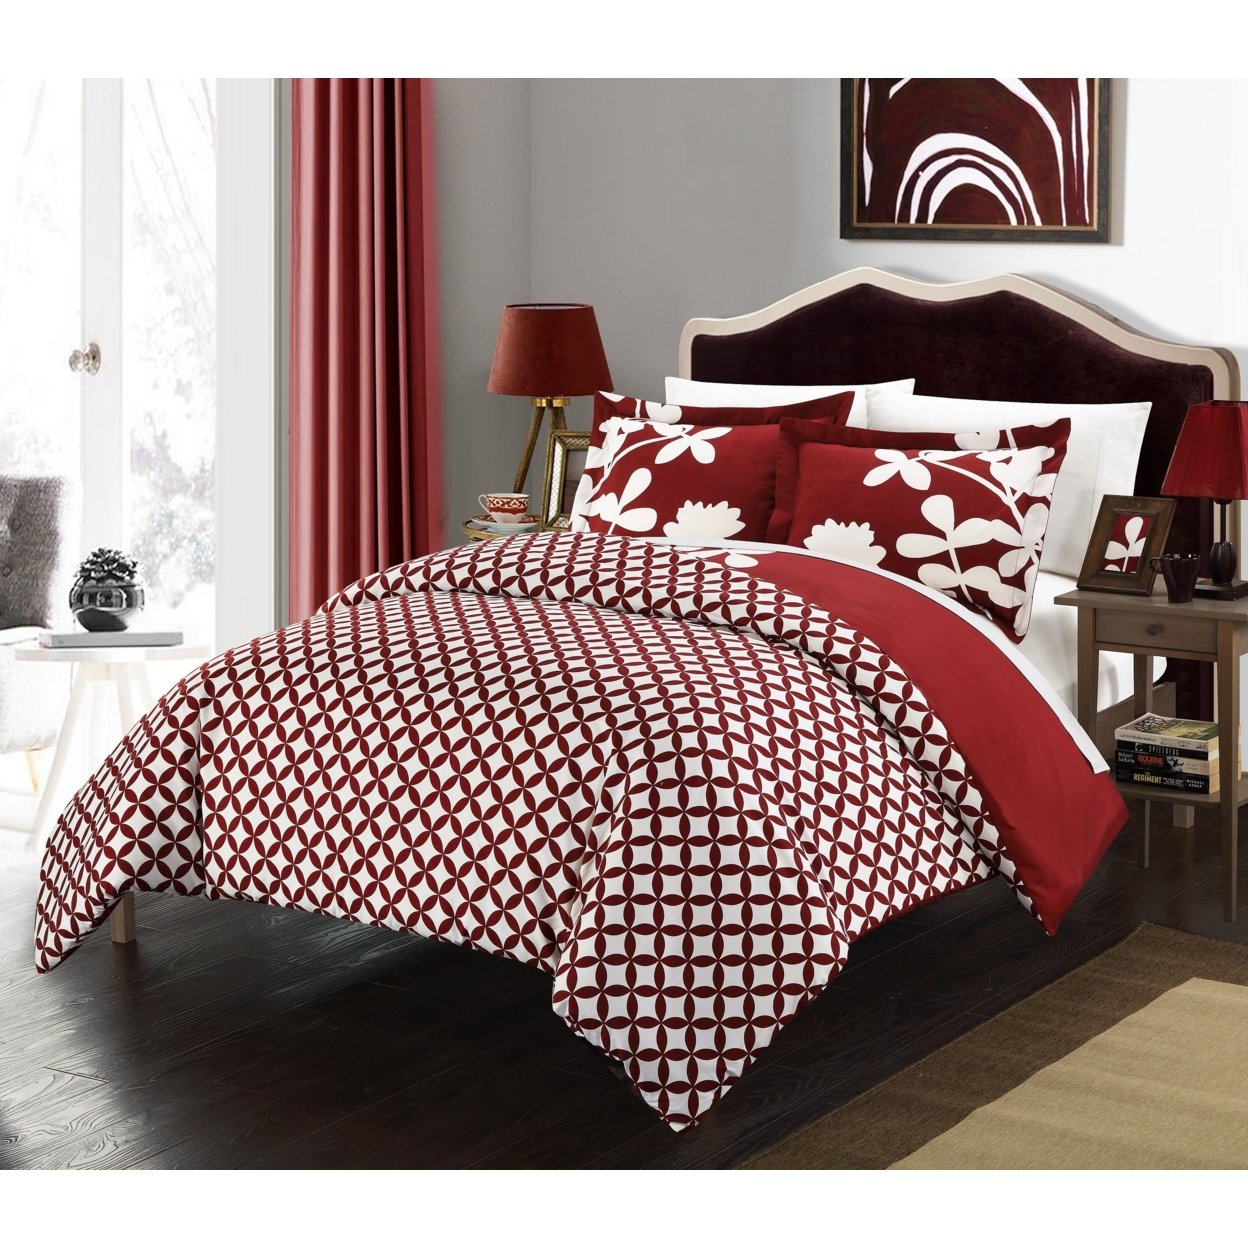 3 Piece Amaryllis Reversible Large Scale Floral Design Printed With Diamond Pattern Reverse Duvet Cover Set - Red, Queen